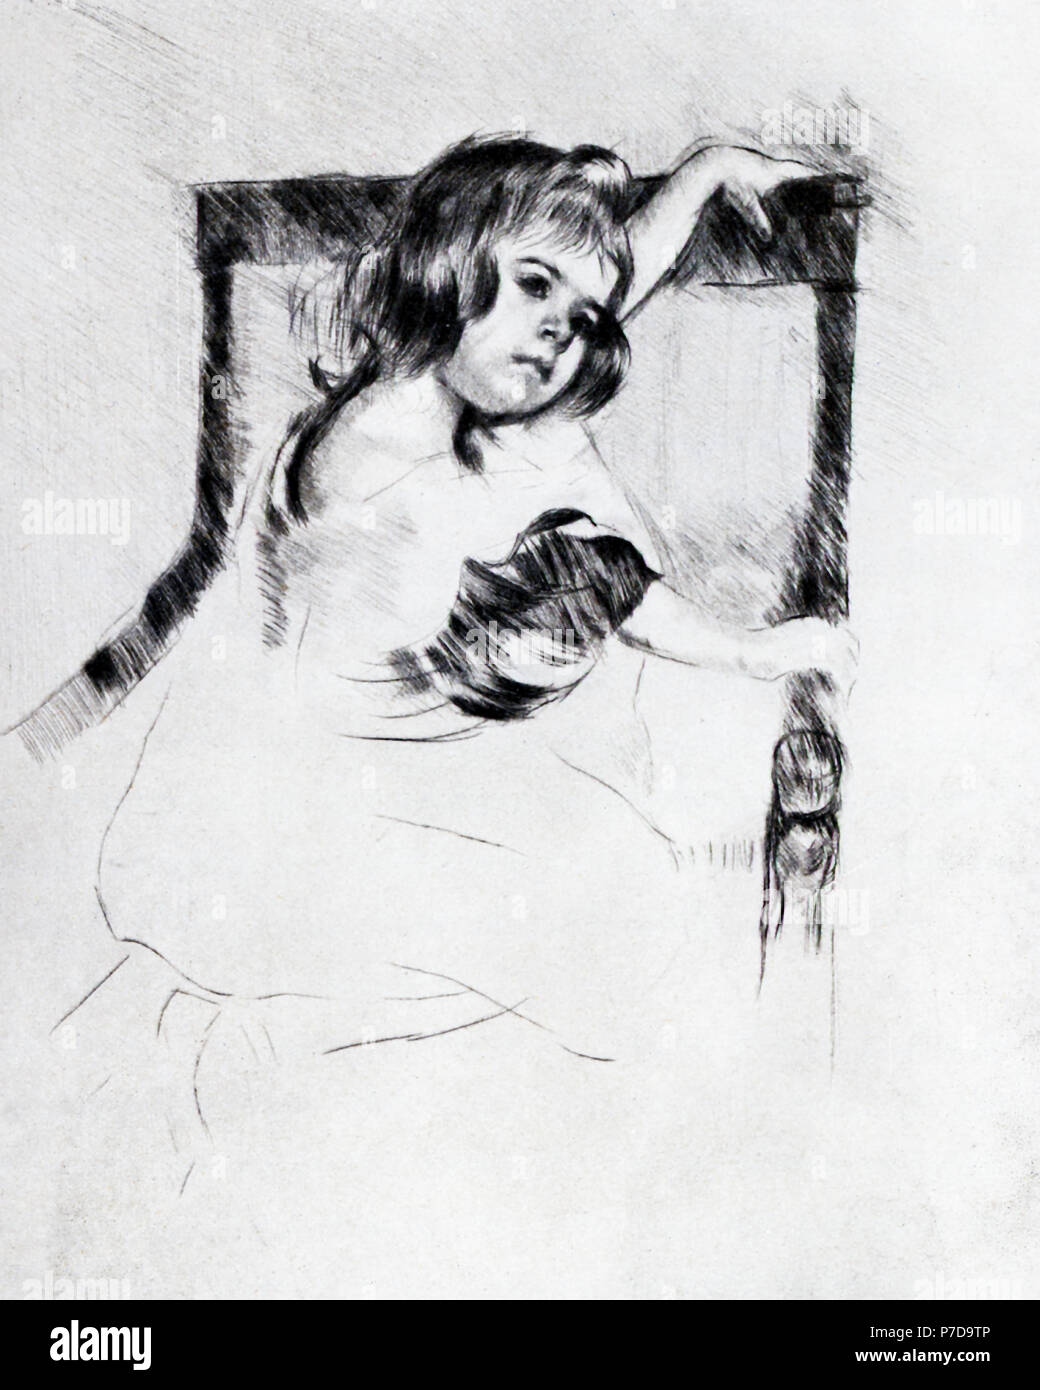 Mary Cassatt (1844-1926) was the only American artist to exhibit with the impressionists in Paris. She became known for her paintings of domestic moments, especially her pictures of women and children. Her works were among the first impressionist works seen in the United States. This etching is titled “Child Resting.” Stock Photo